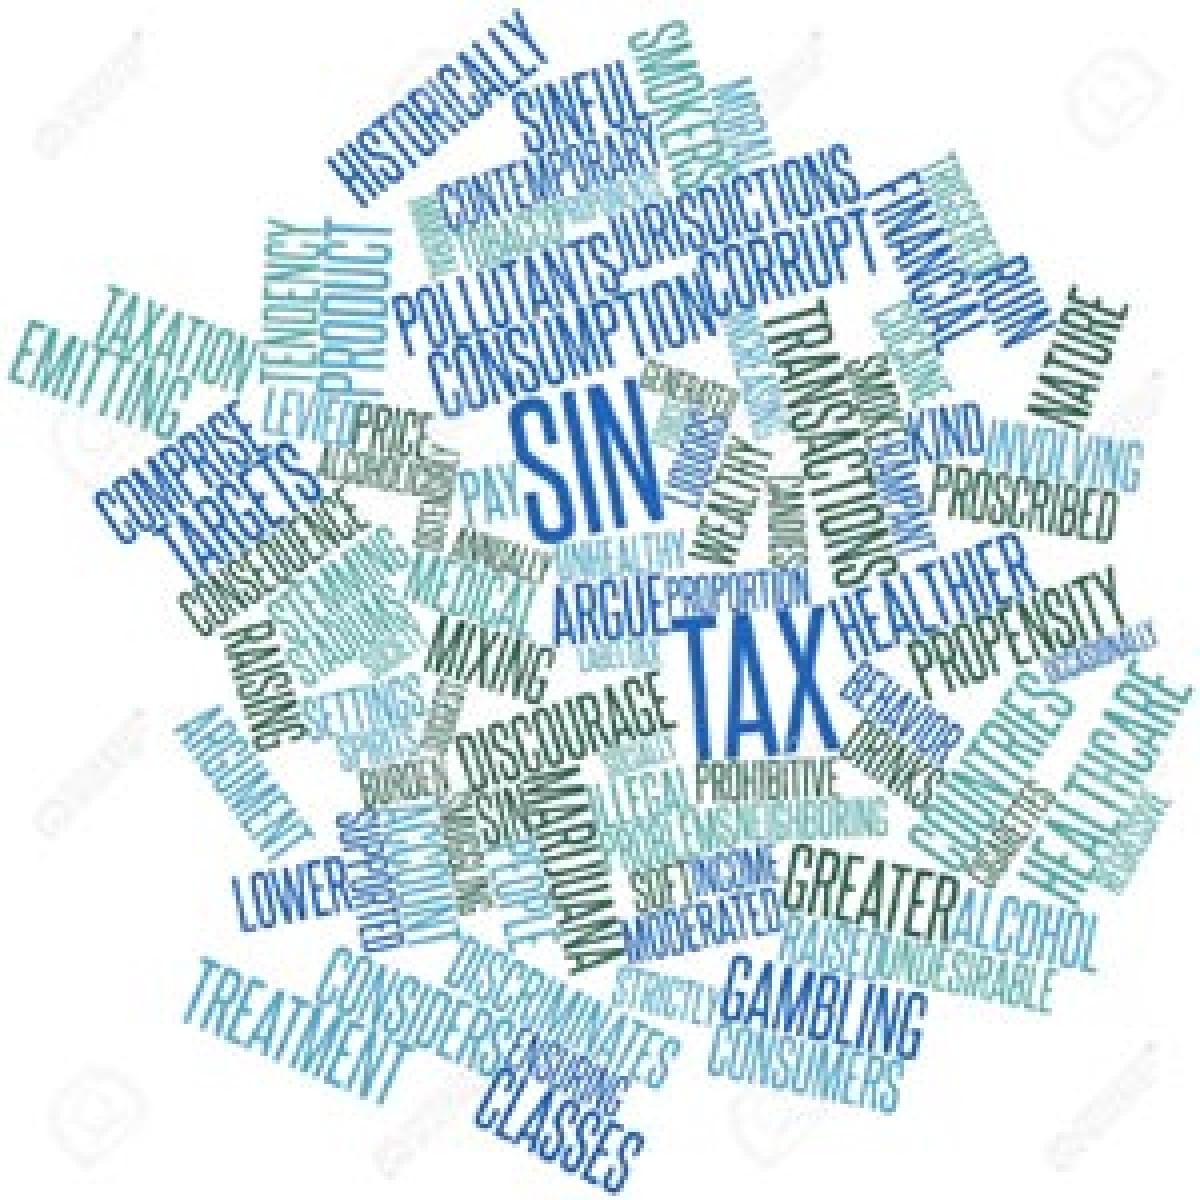 What is sin tax?